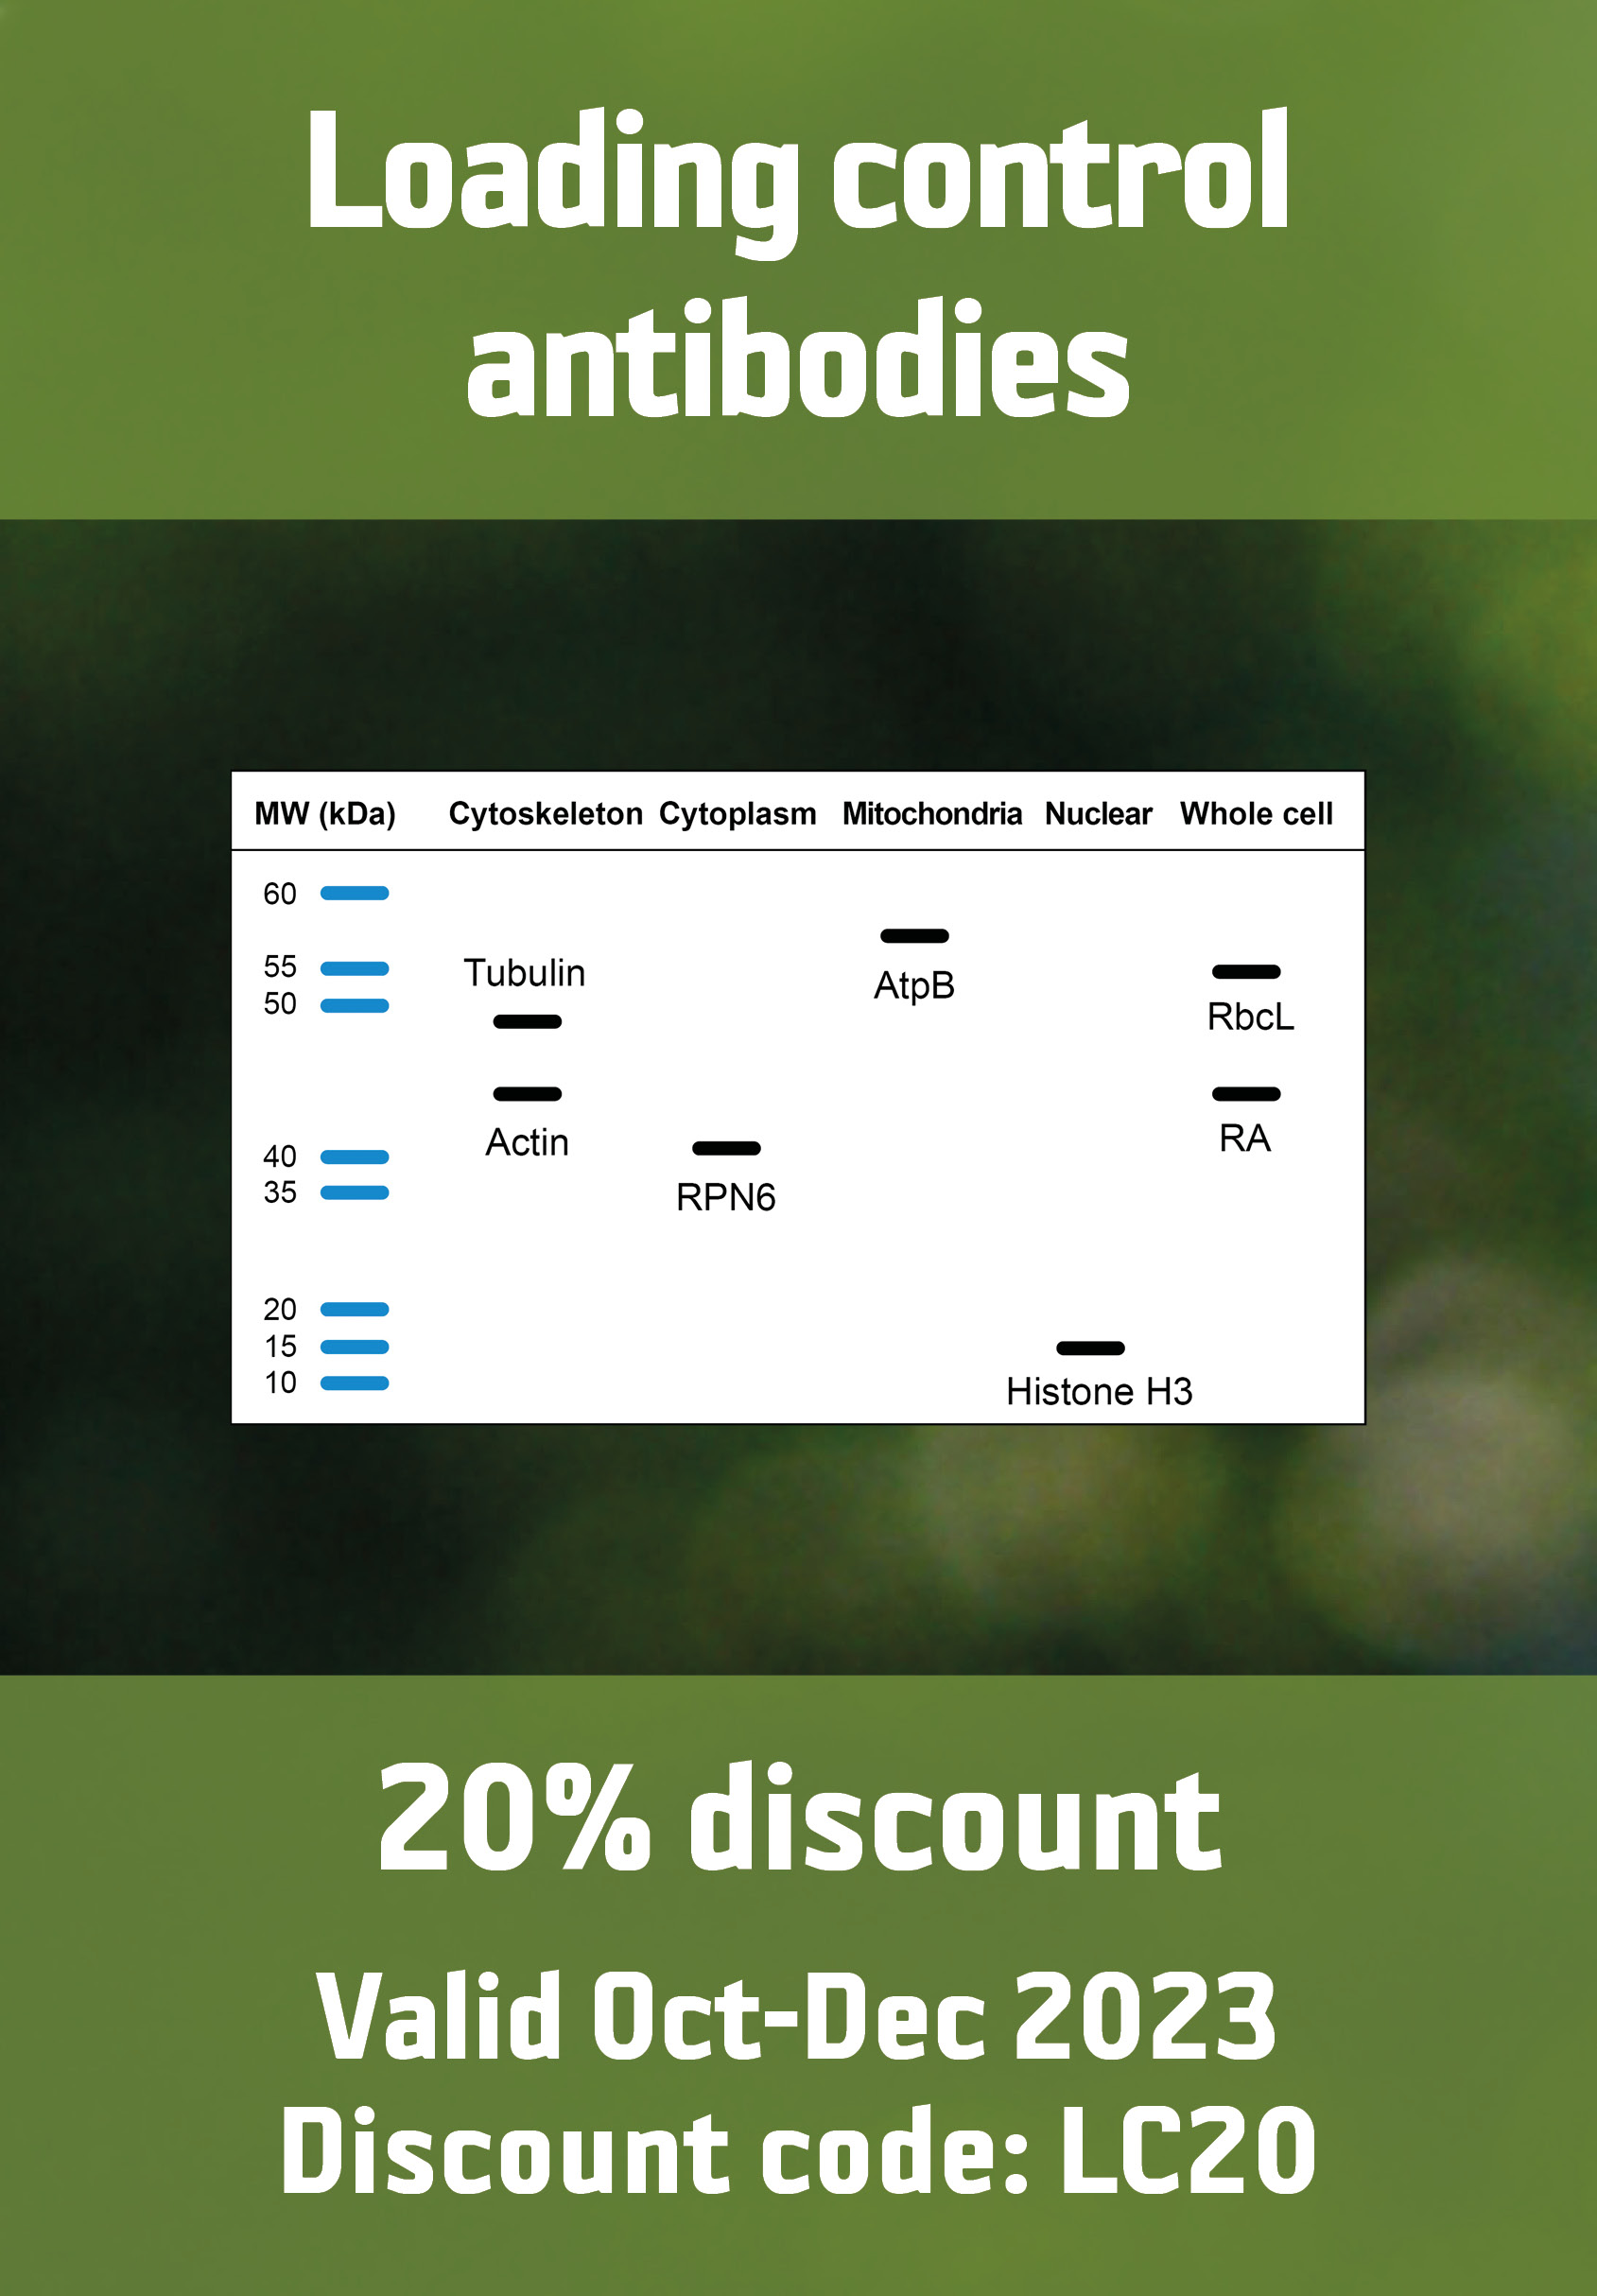 20 % off loading control antibodies until end of 2023